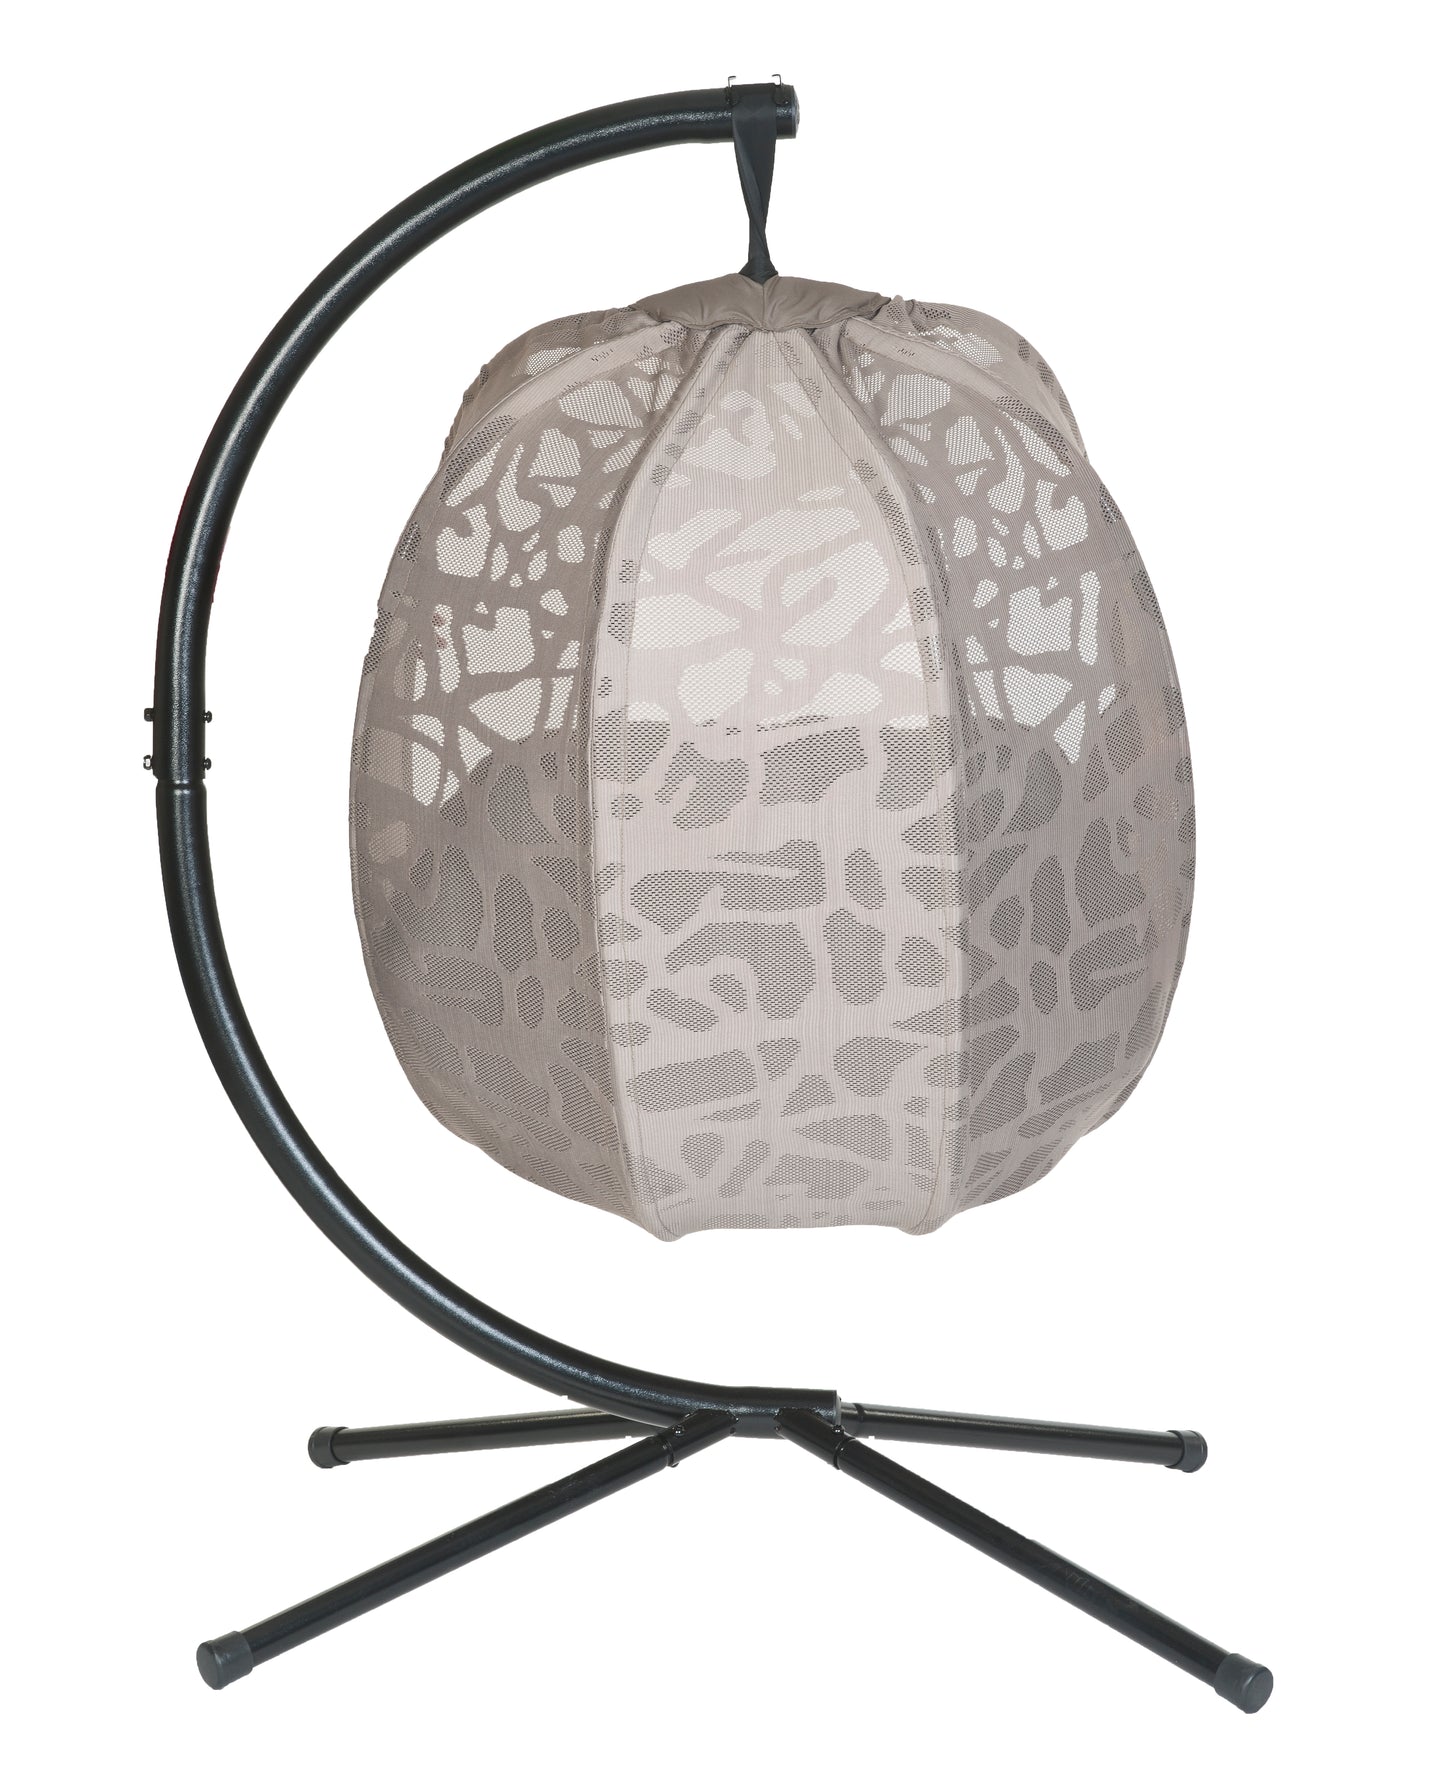 FlowerHouse Branch Hanging Egg Chair with stand - back view